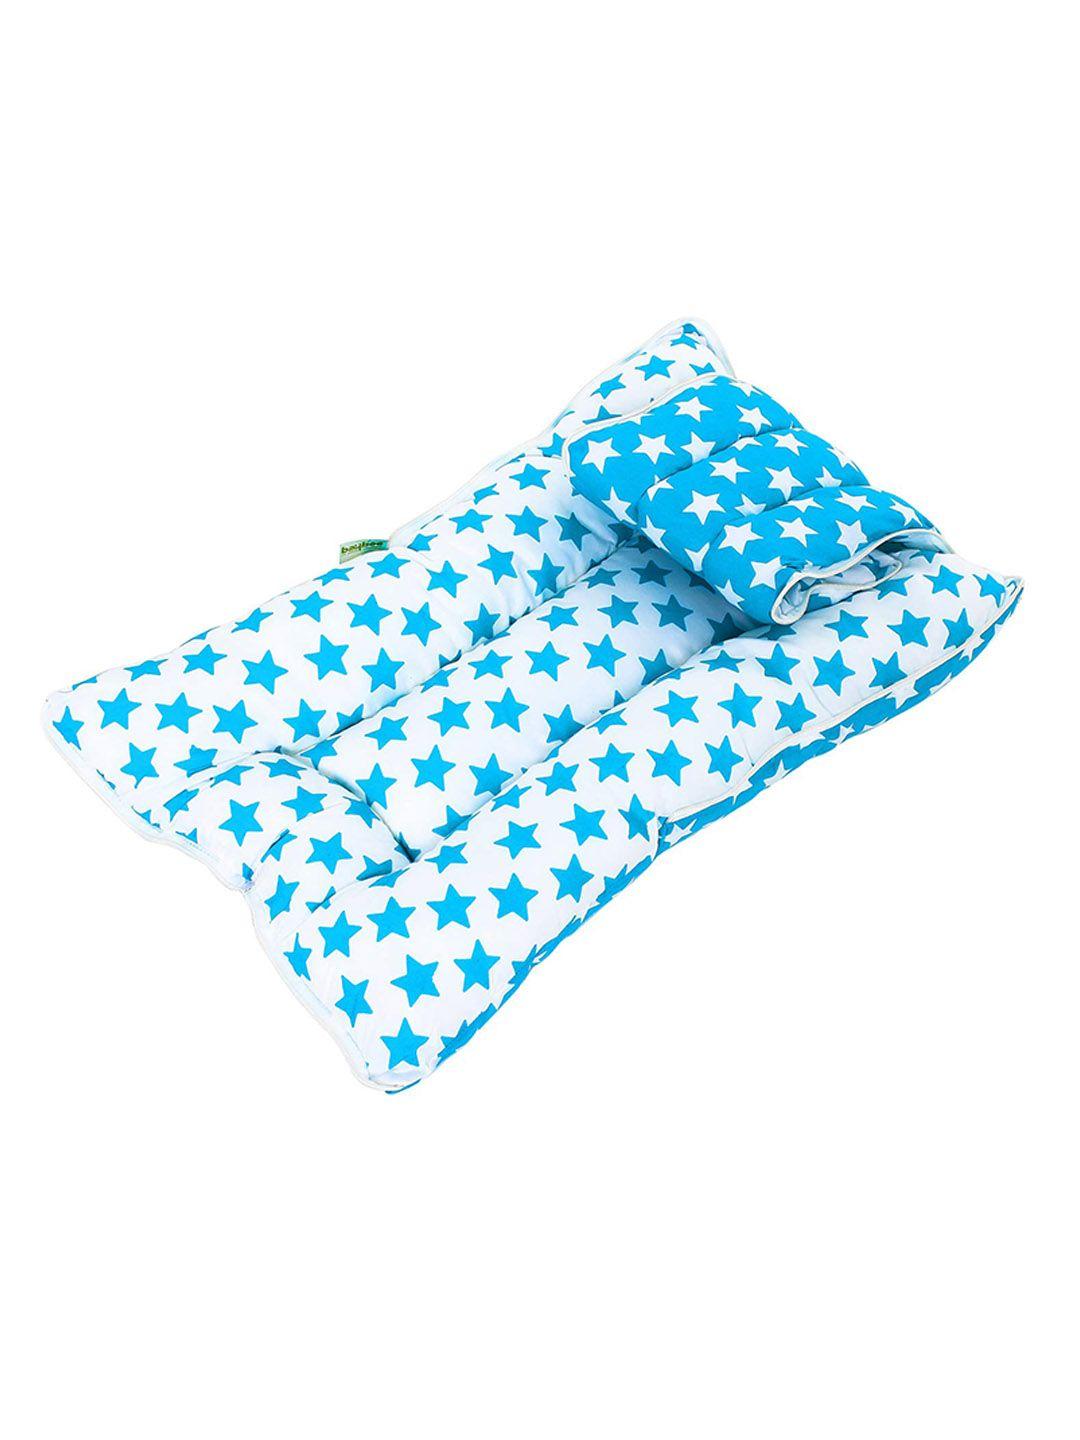 baybee little star printed cotton 3 in 1 baby sleeping bed